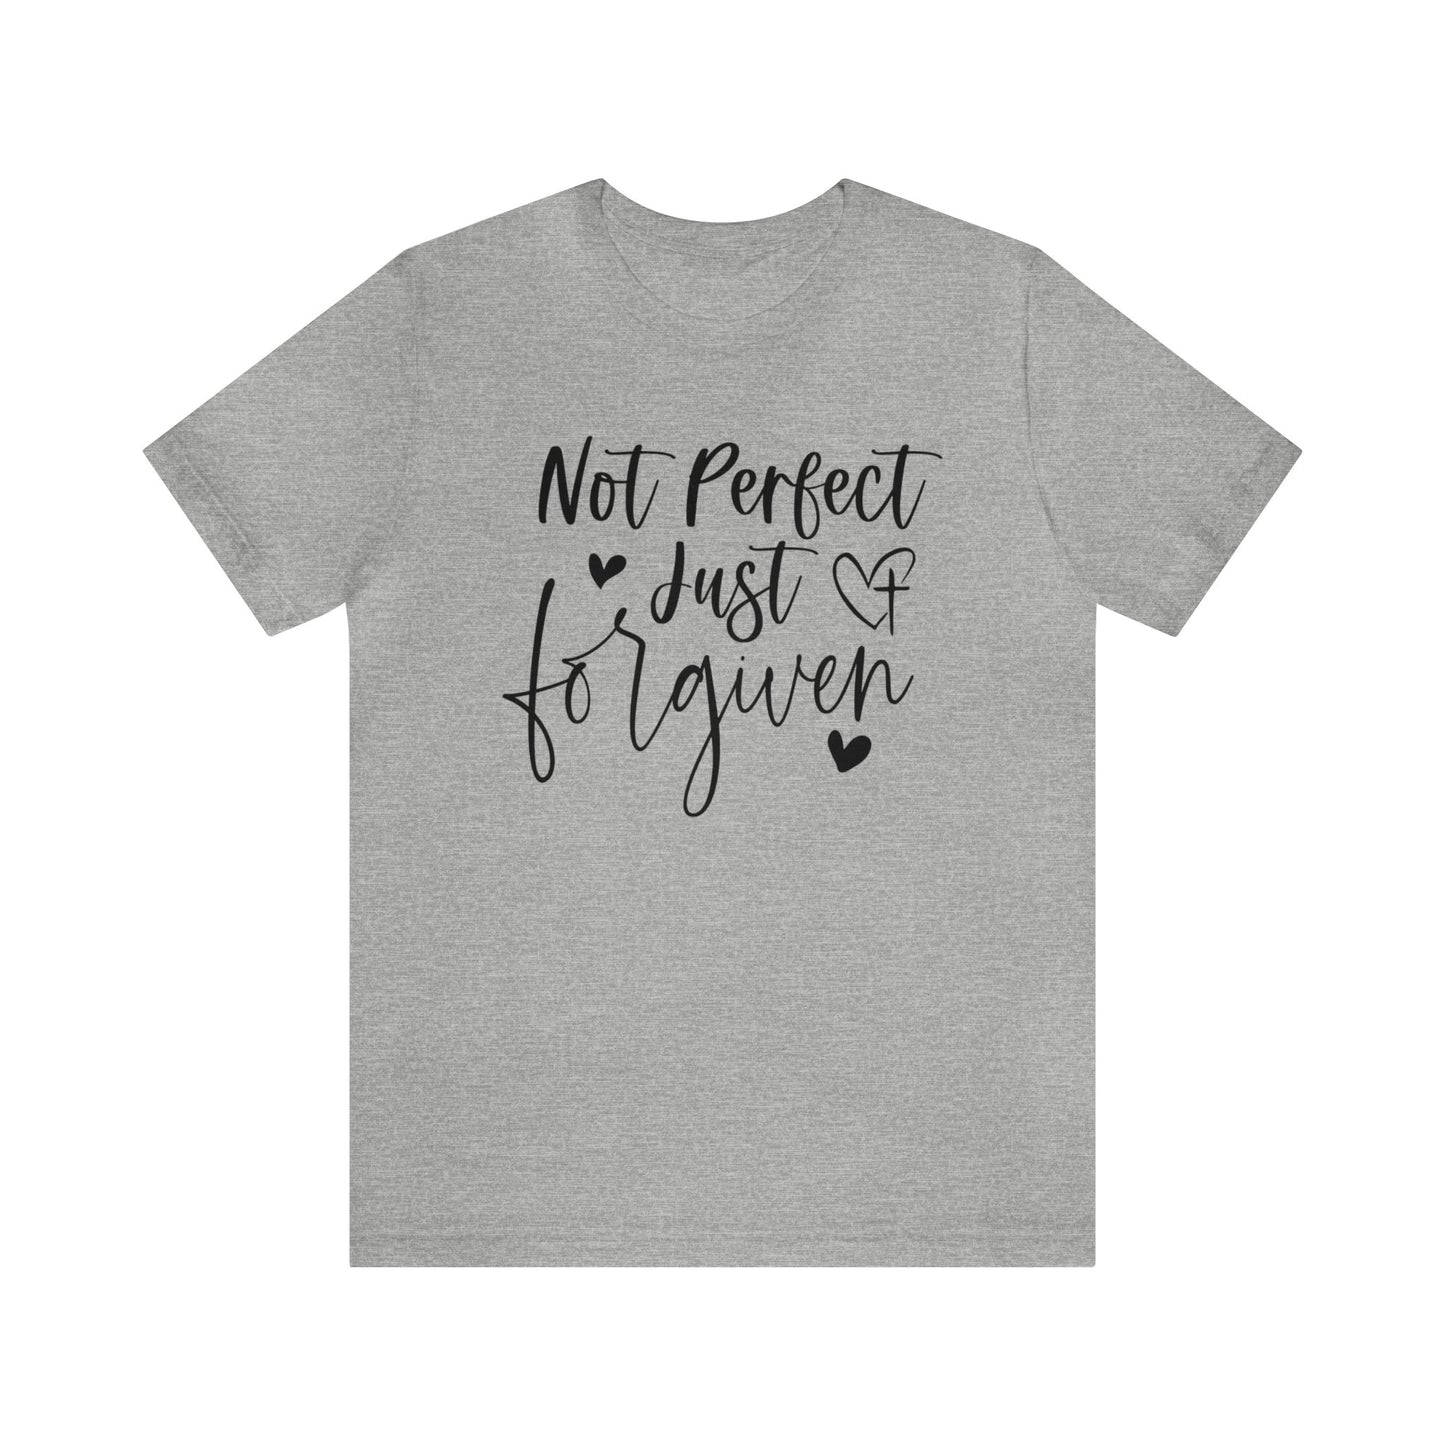 Not Perfect Just Forgiven - Short Sleeve Tee